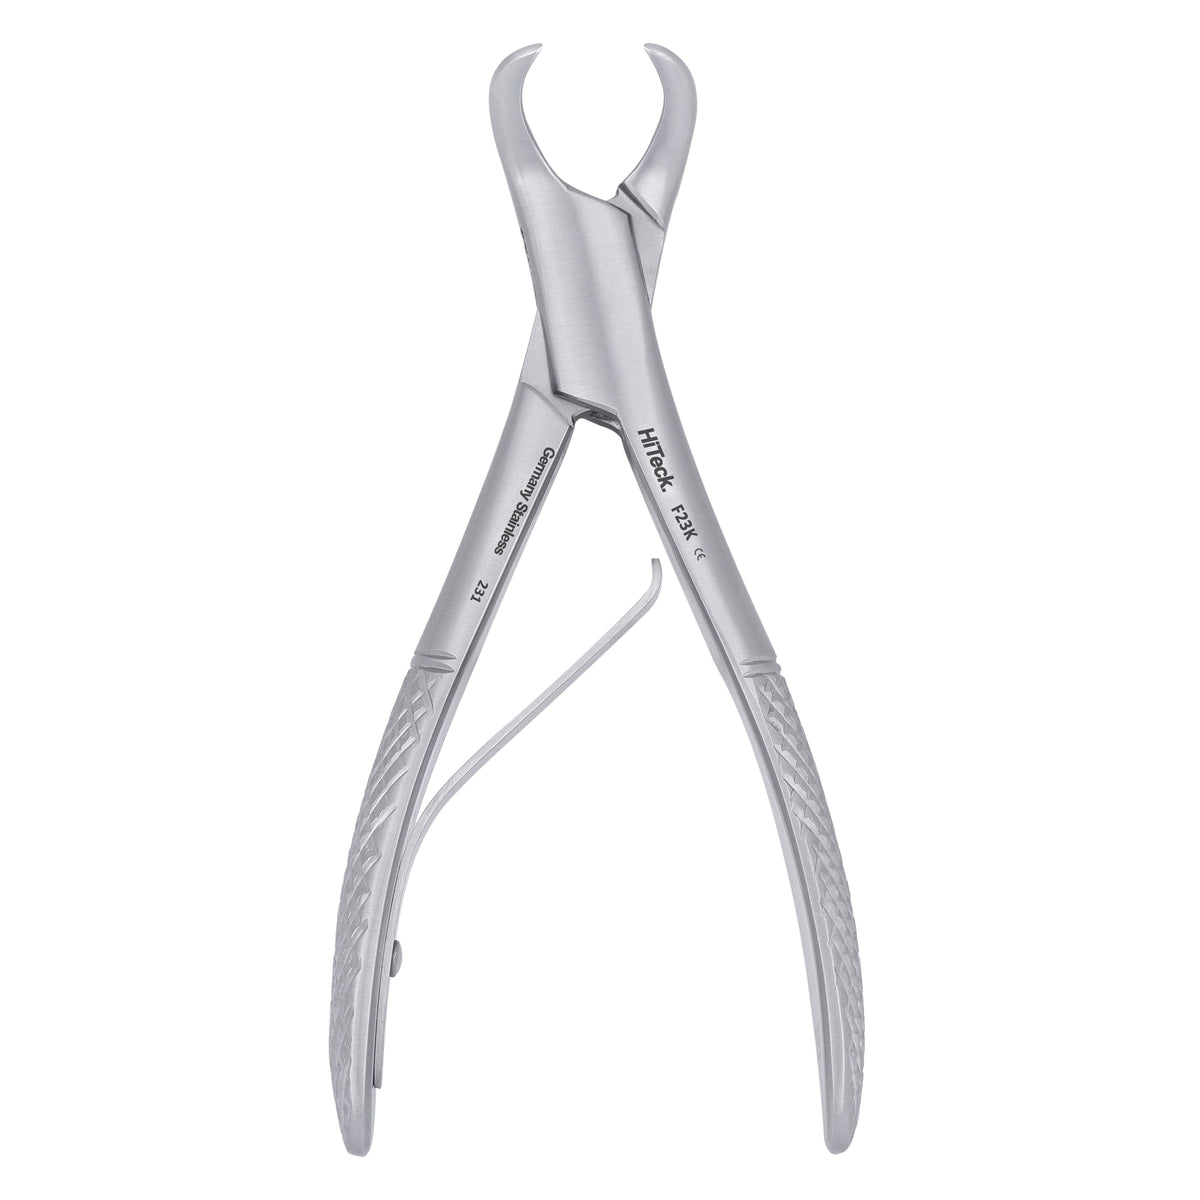 23K Cowhorn Lower Primary Molars Extraction Forcep - HiTeck Medical Instruments